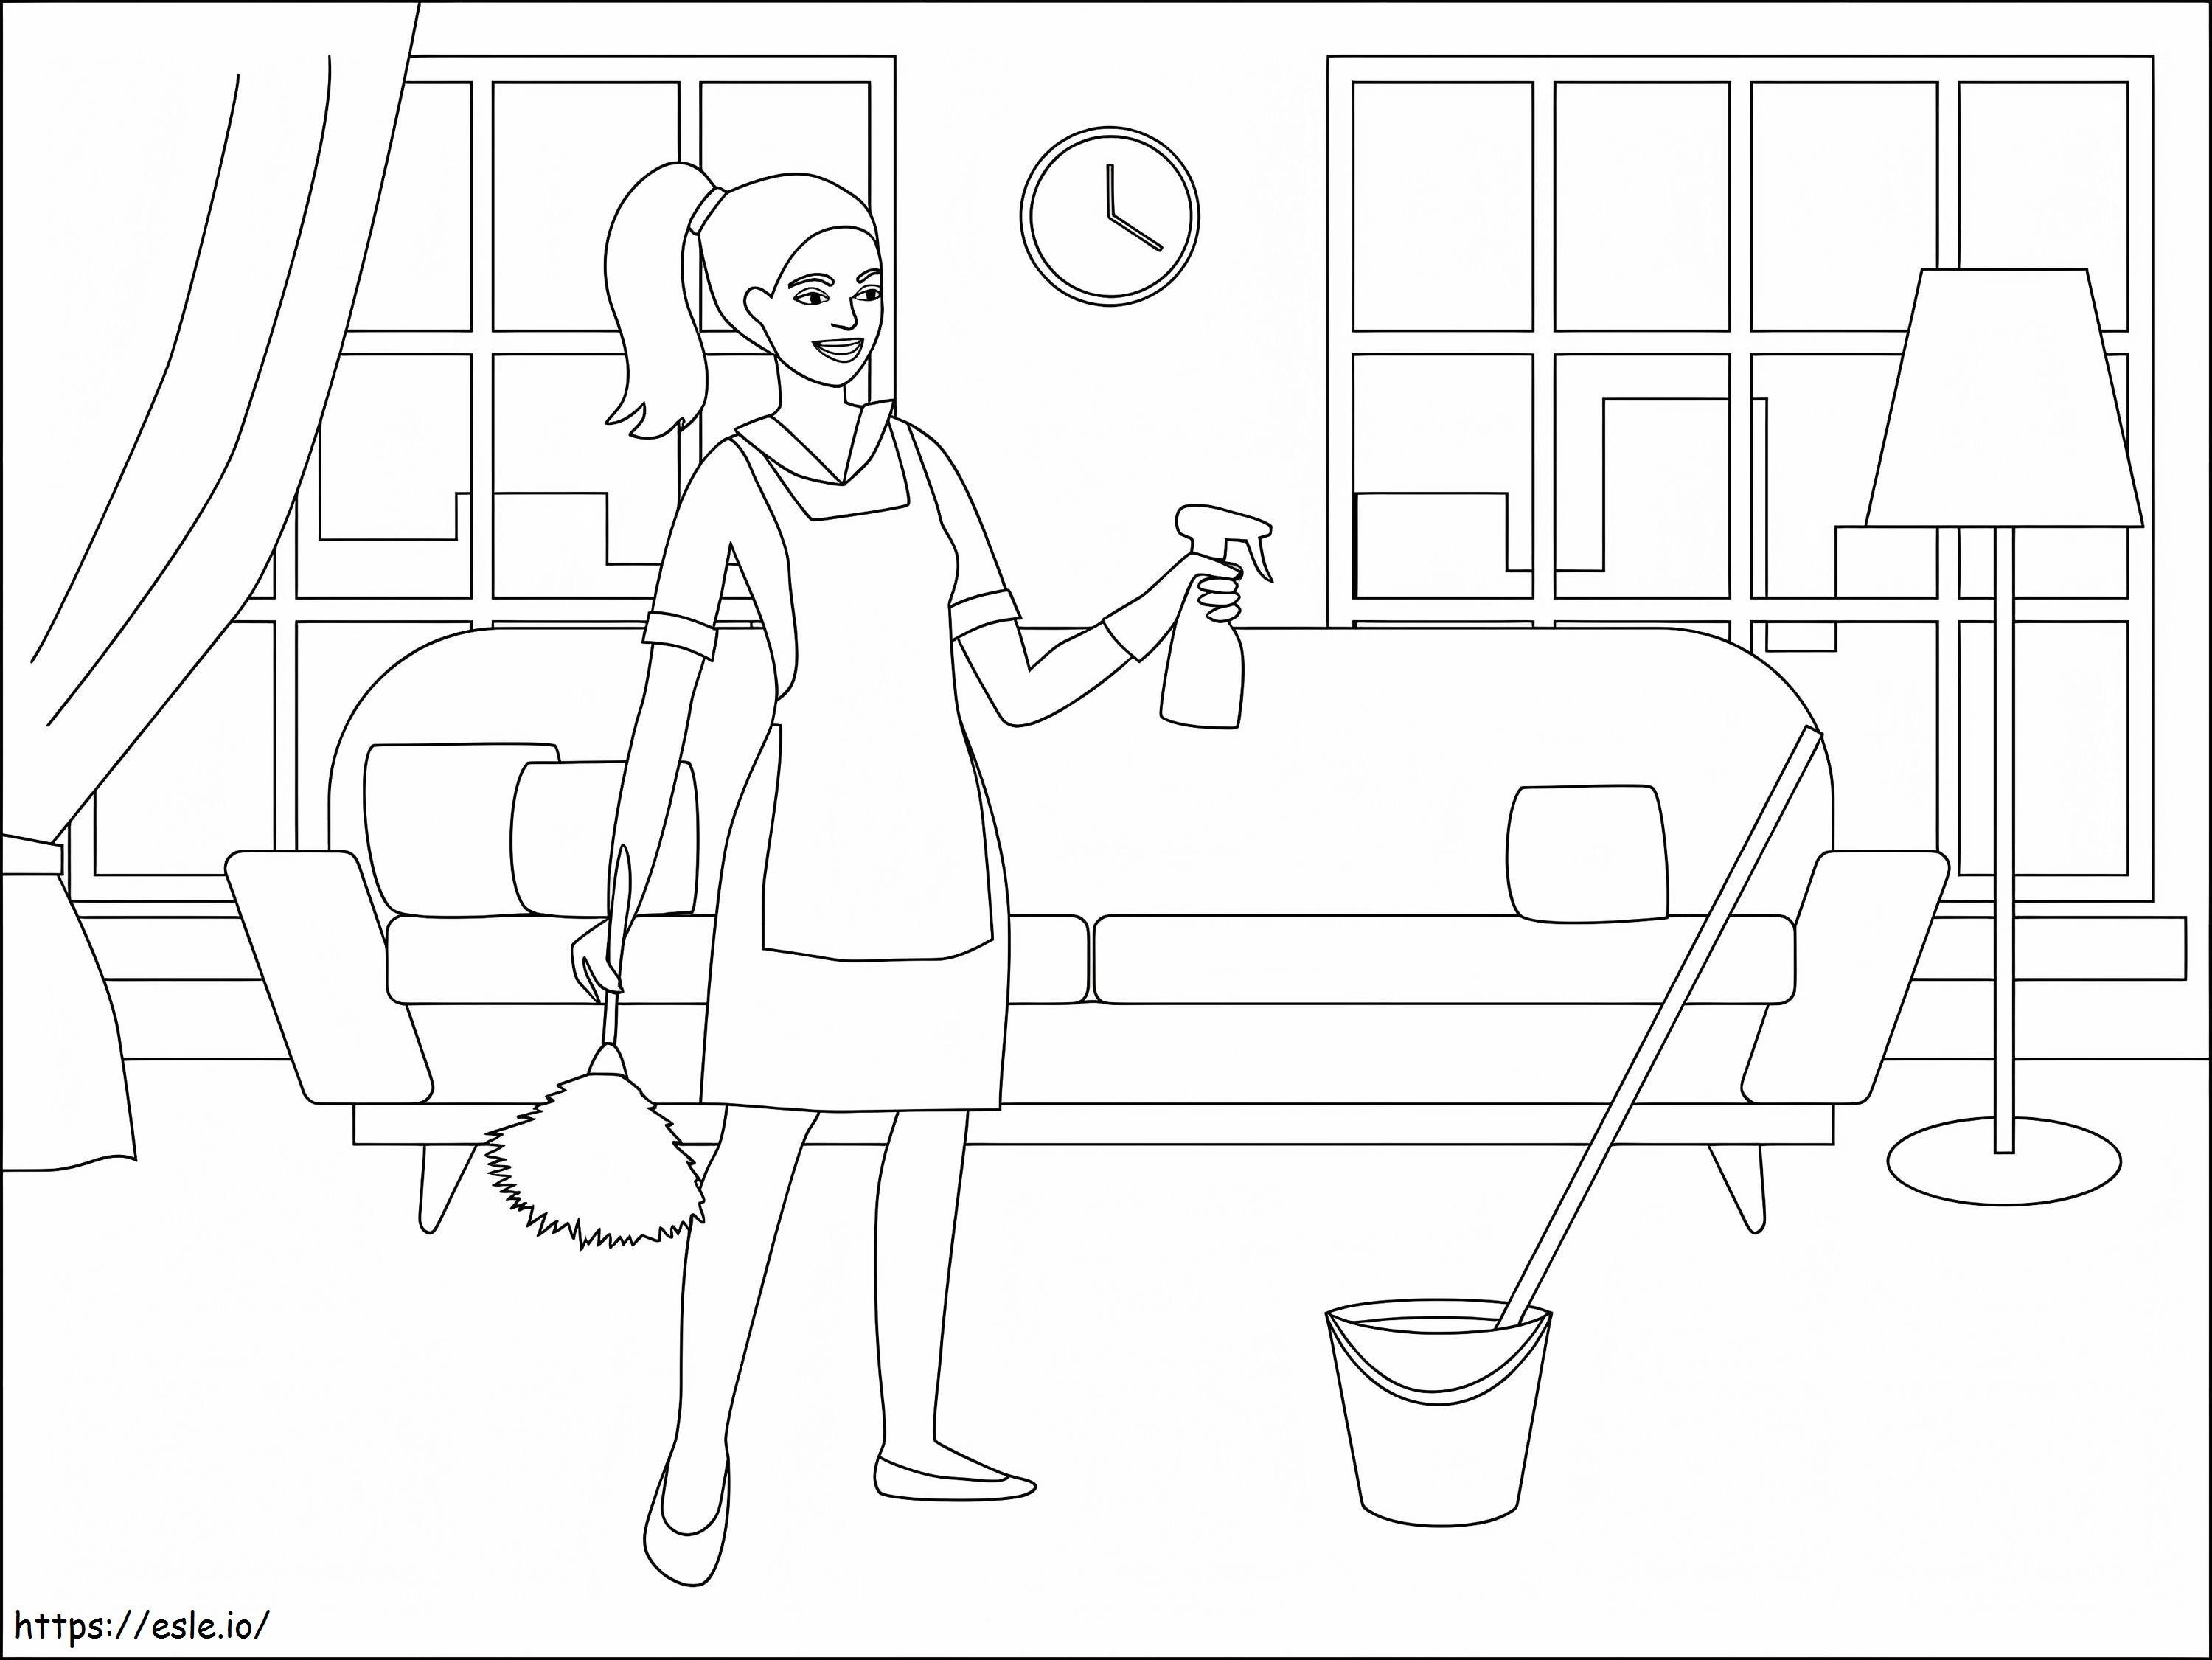 Maid 2 coloring page